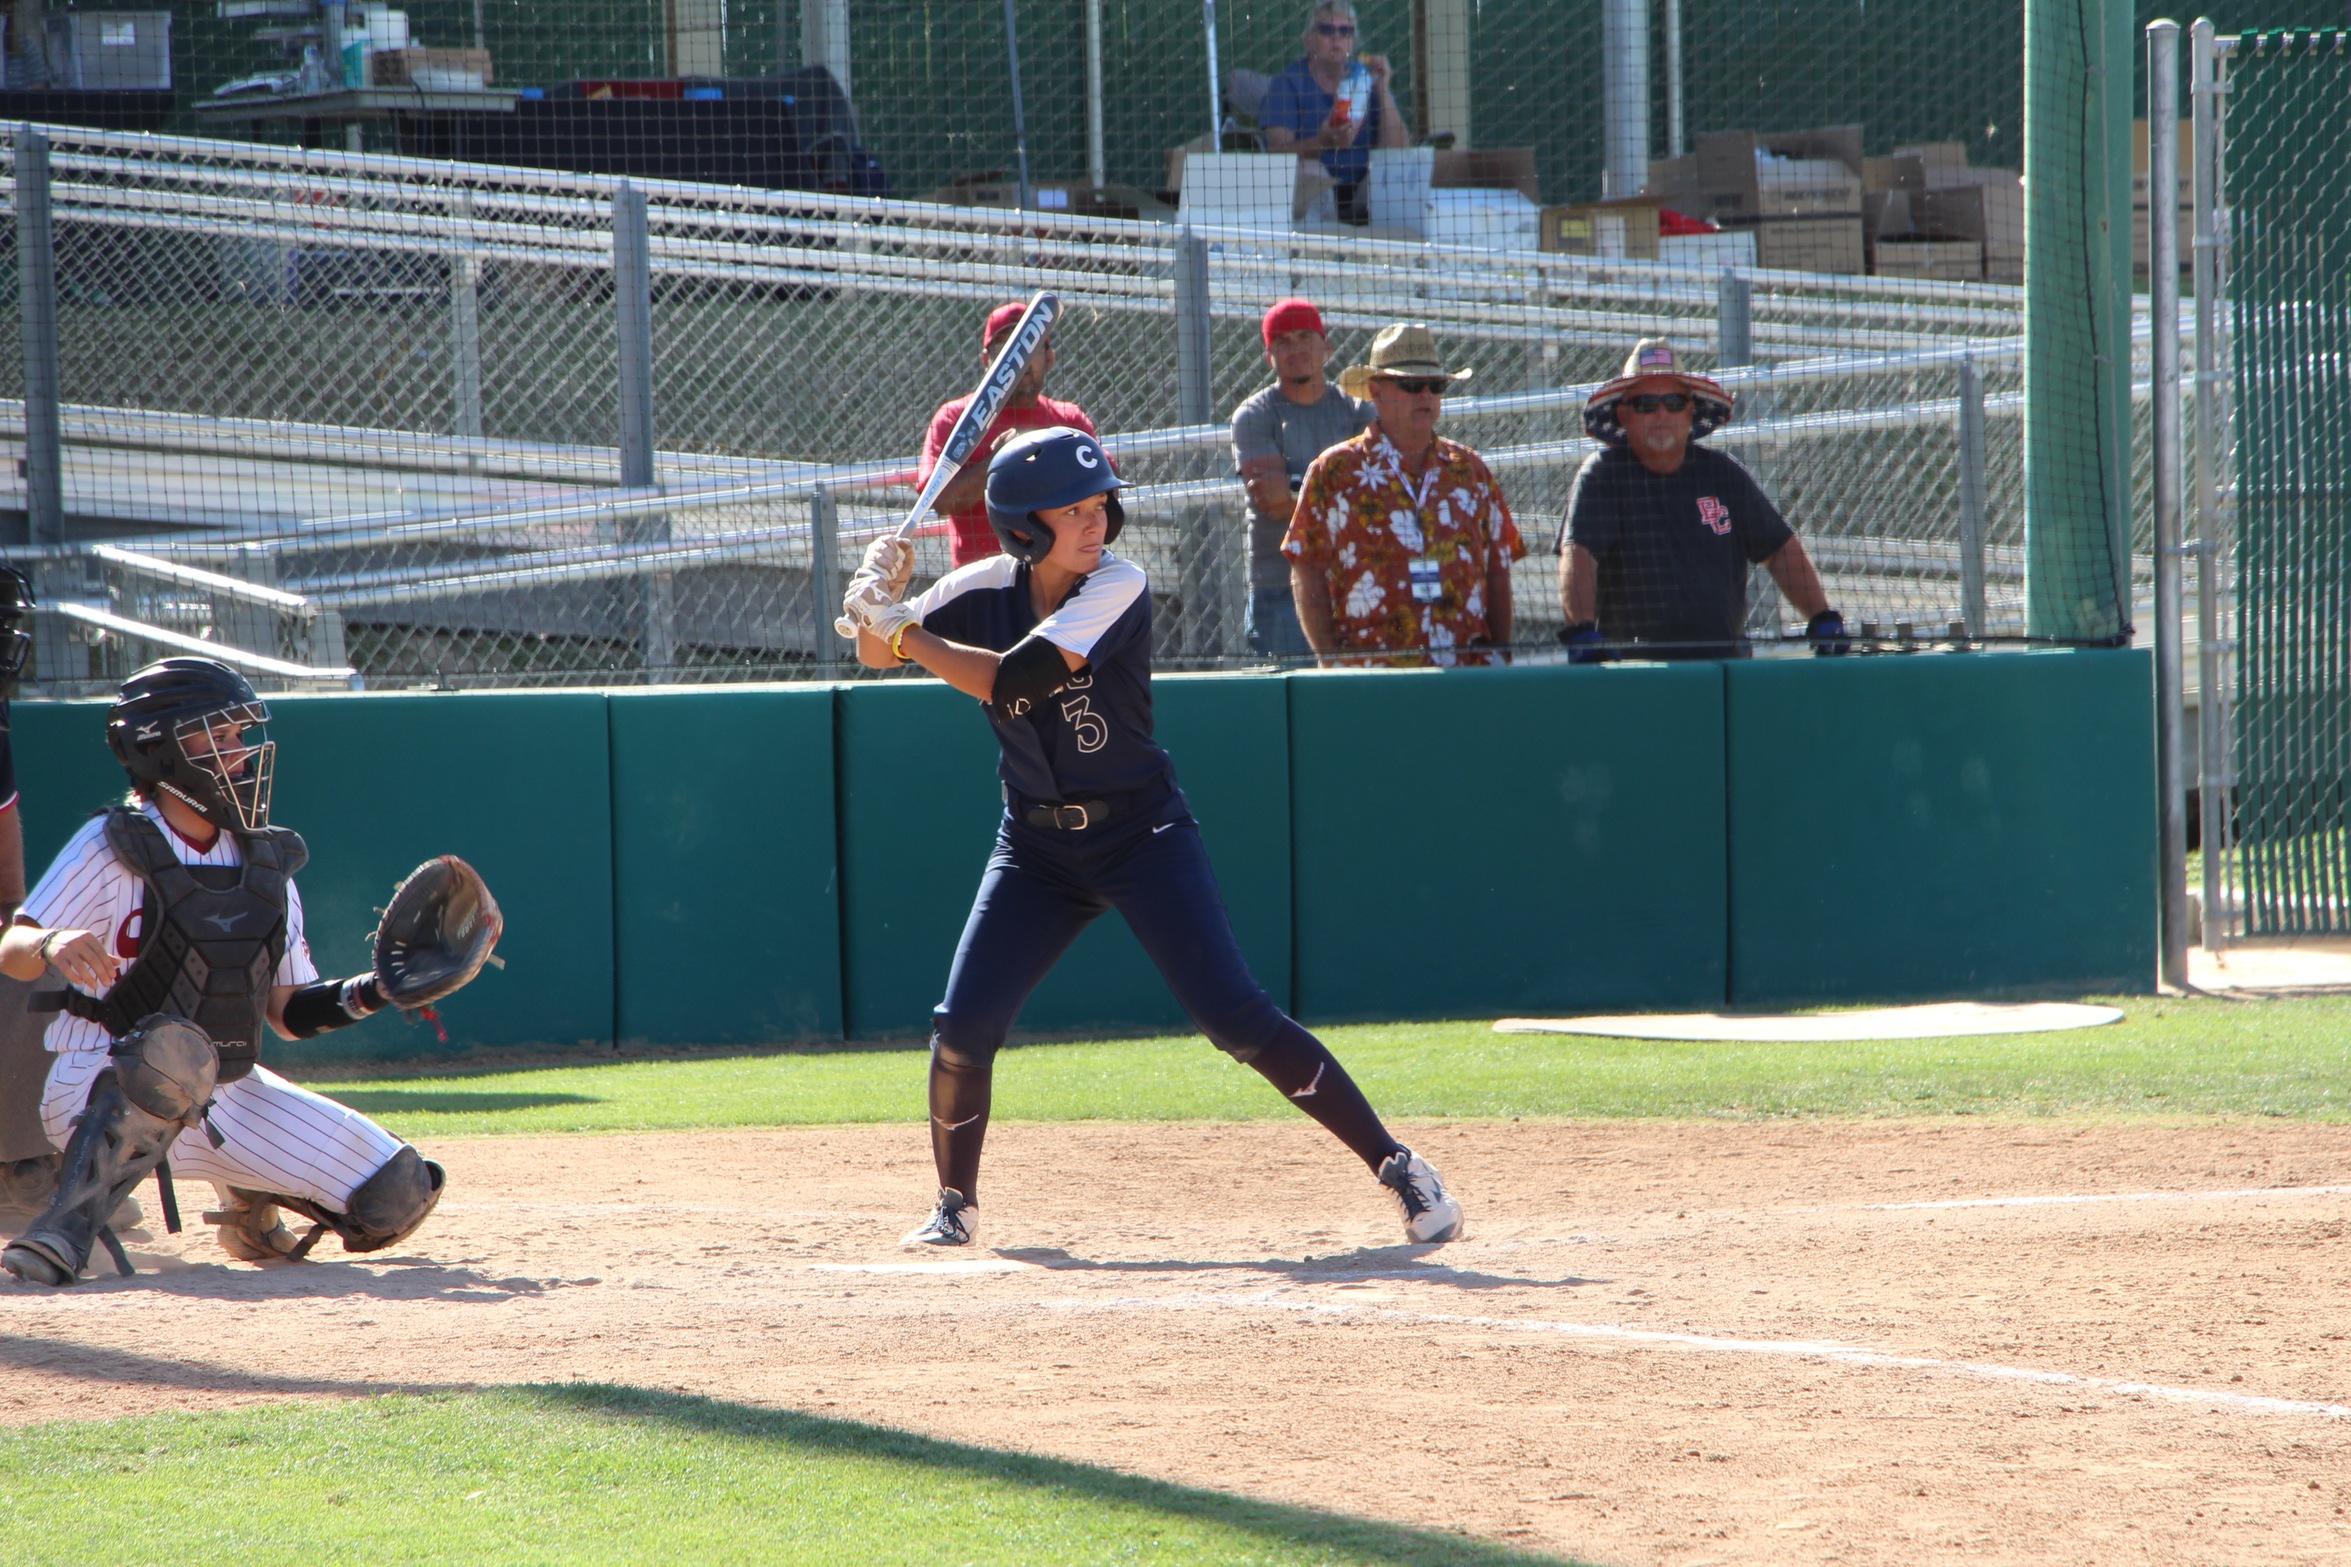 Chargers Softball Season Comes to a Close in the CCCAA Quarter Finals